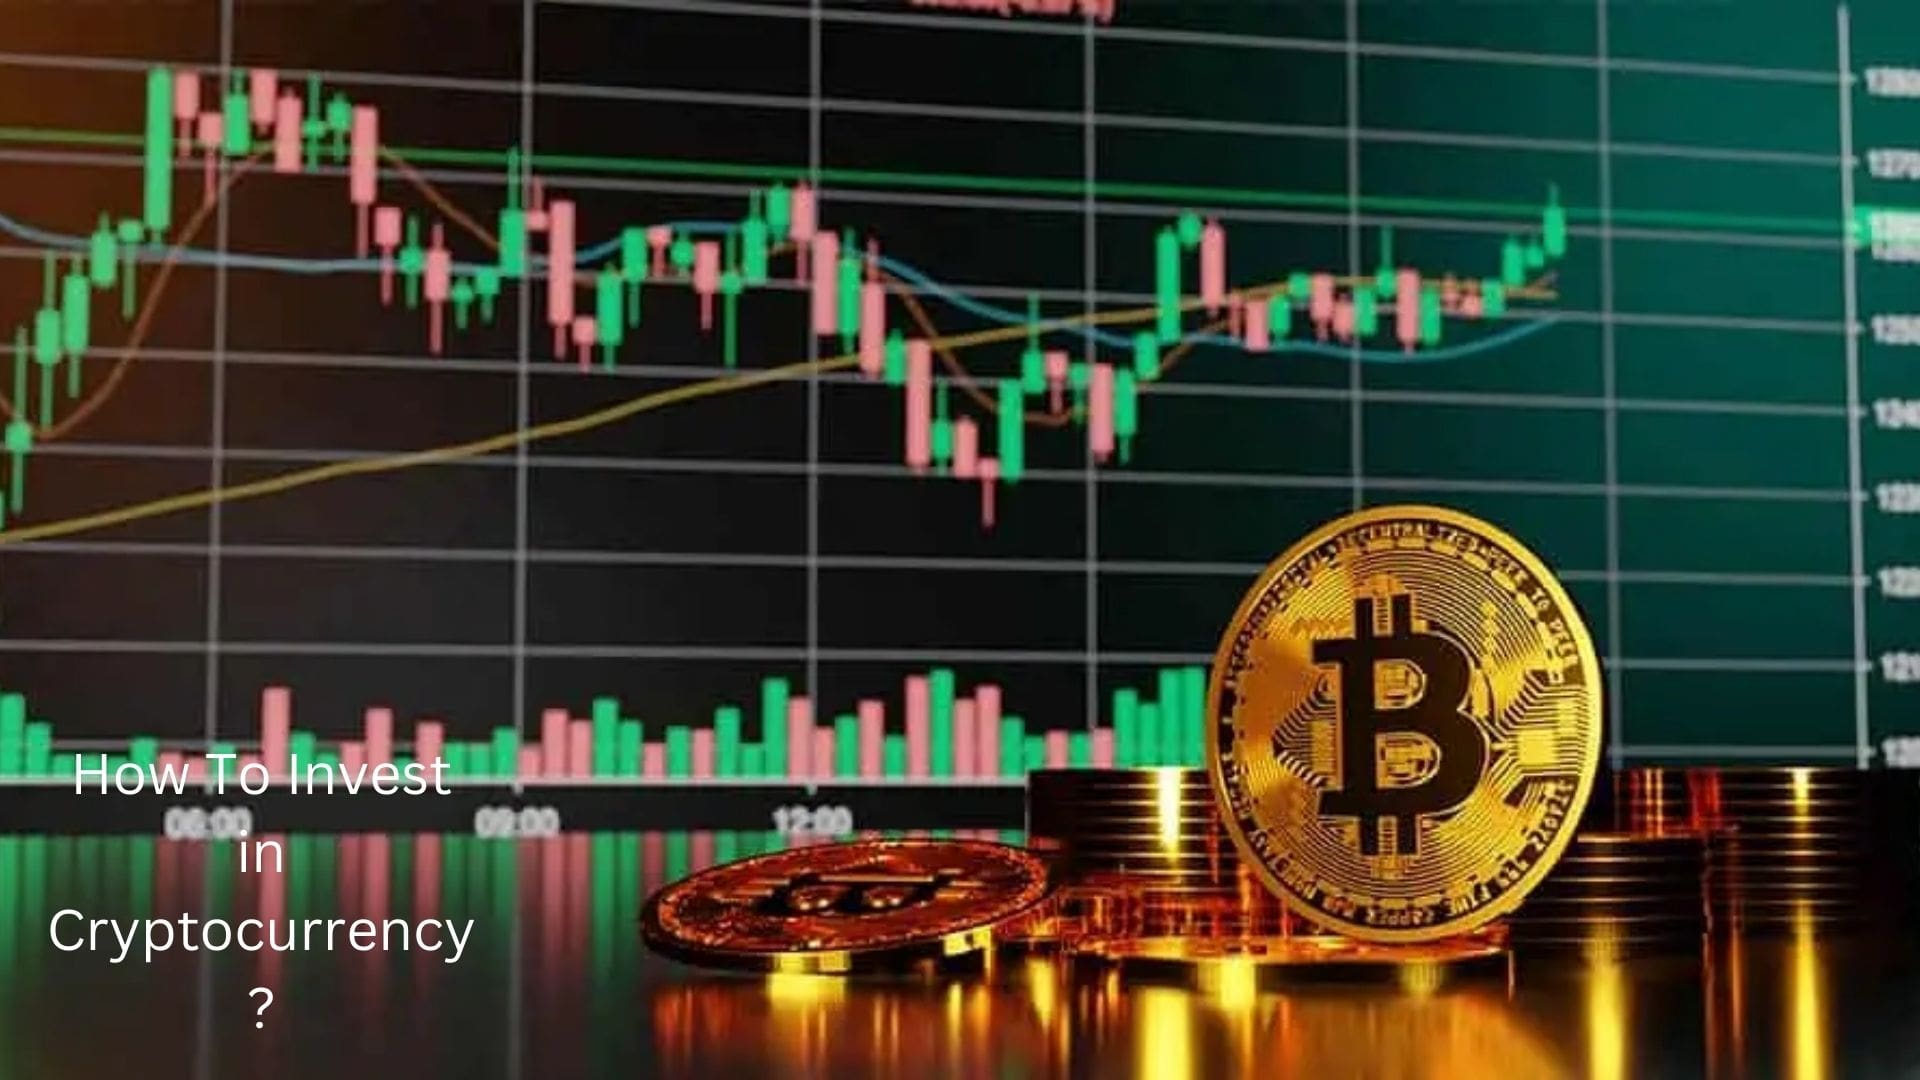 How To Invest in Cryptocurrency?